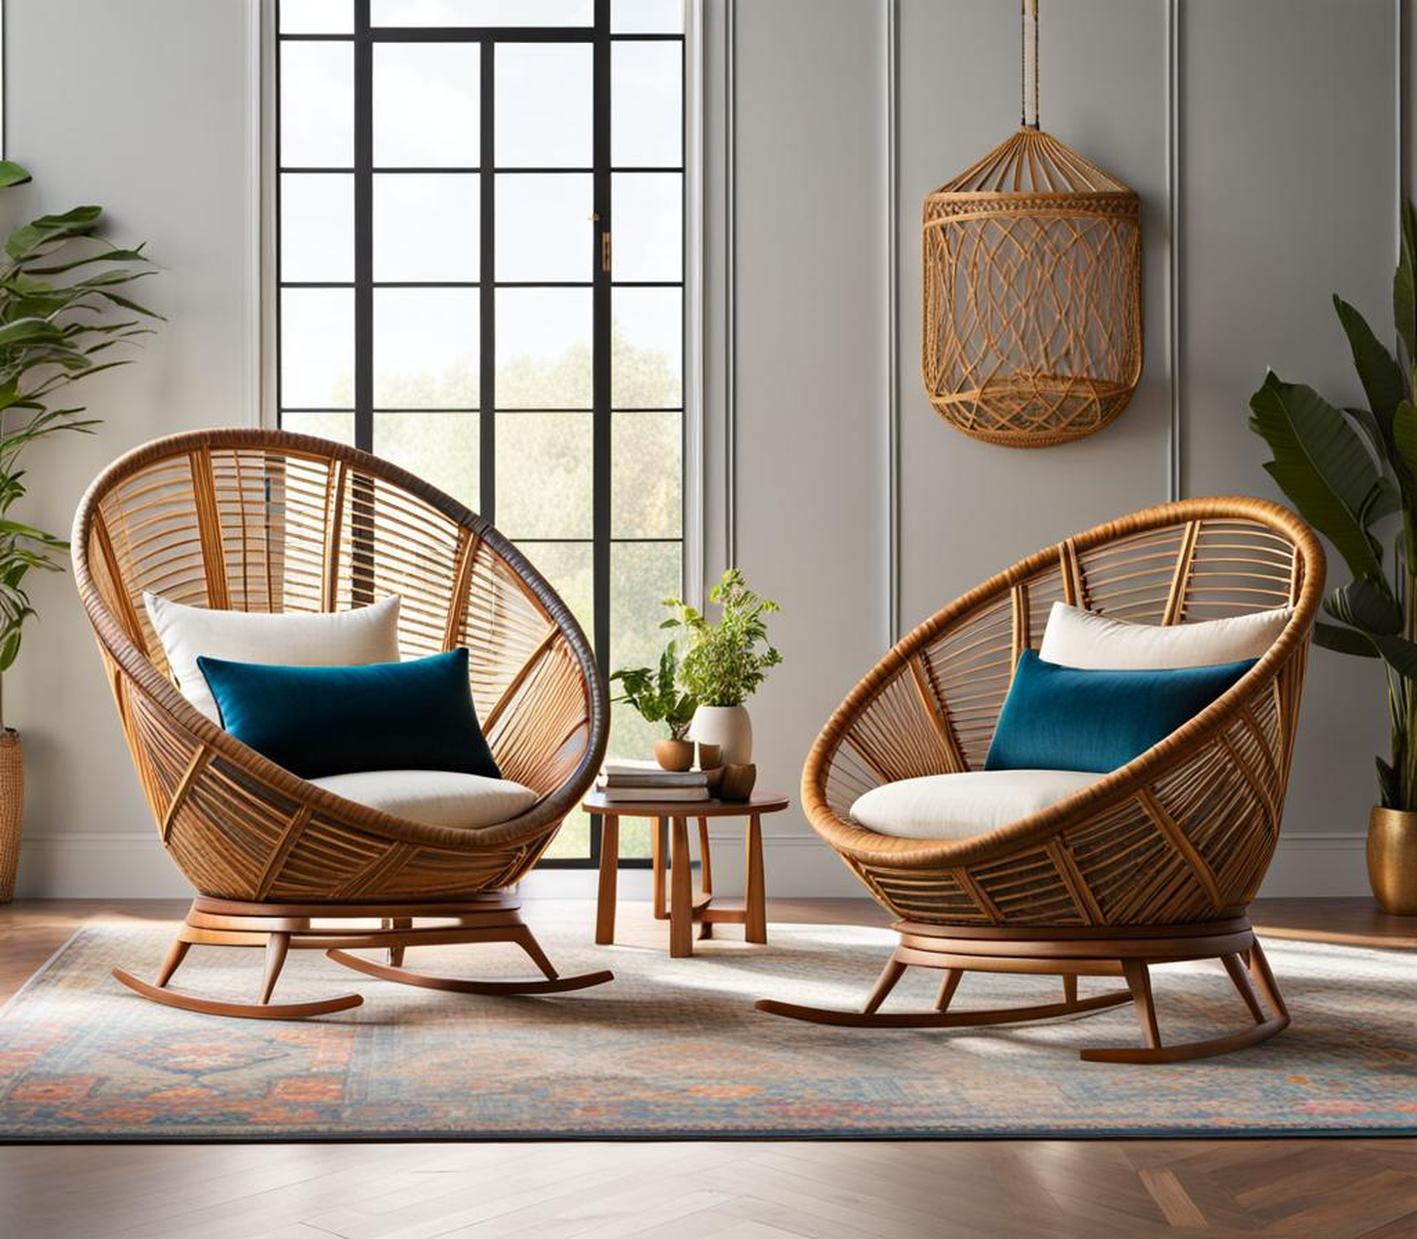 Give Your Living Room’s Decor an Artful, Eclectic Edge with Boho-Style Chairs